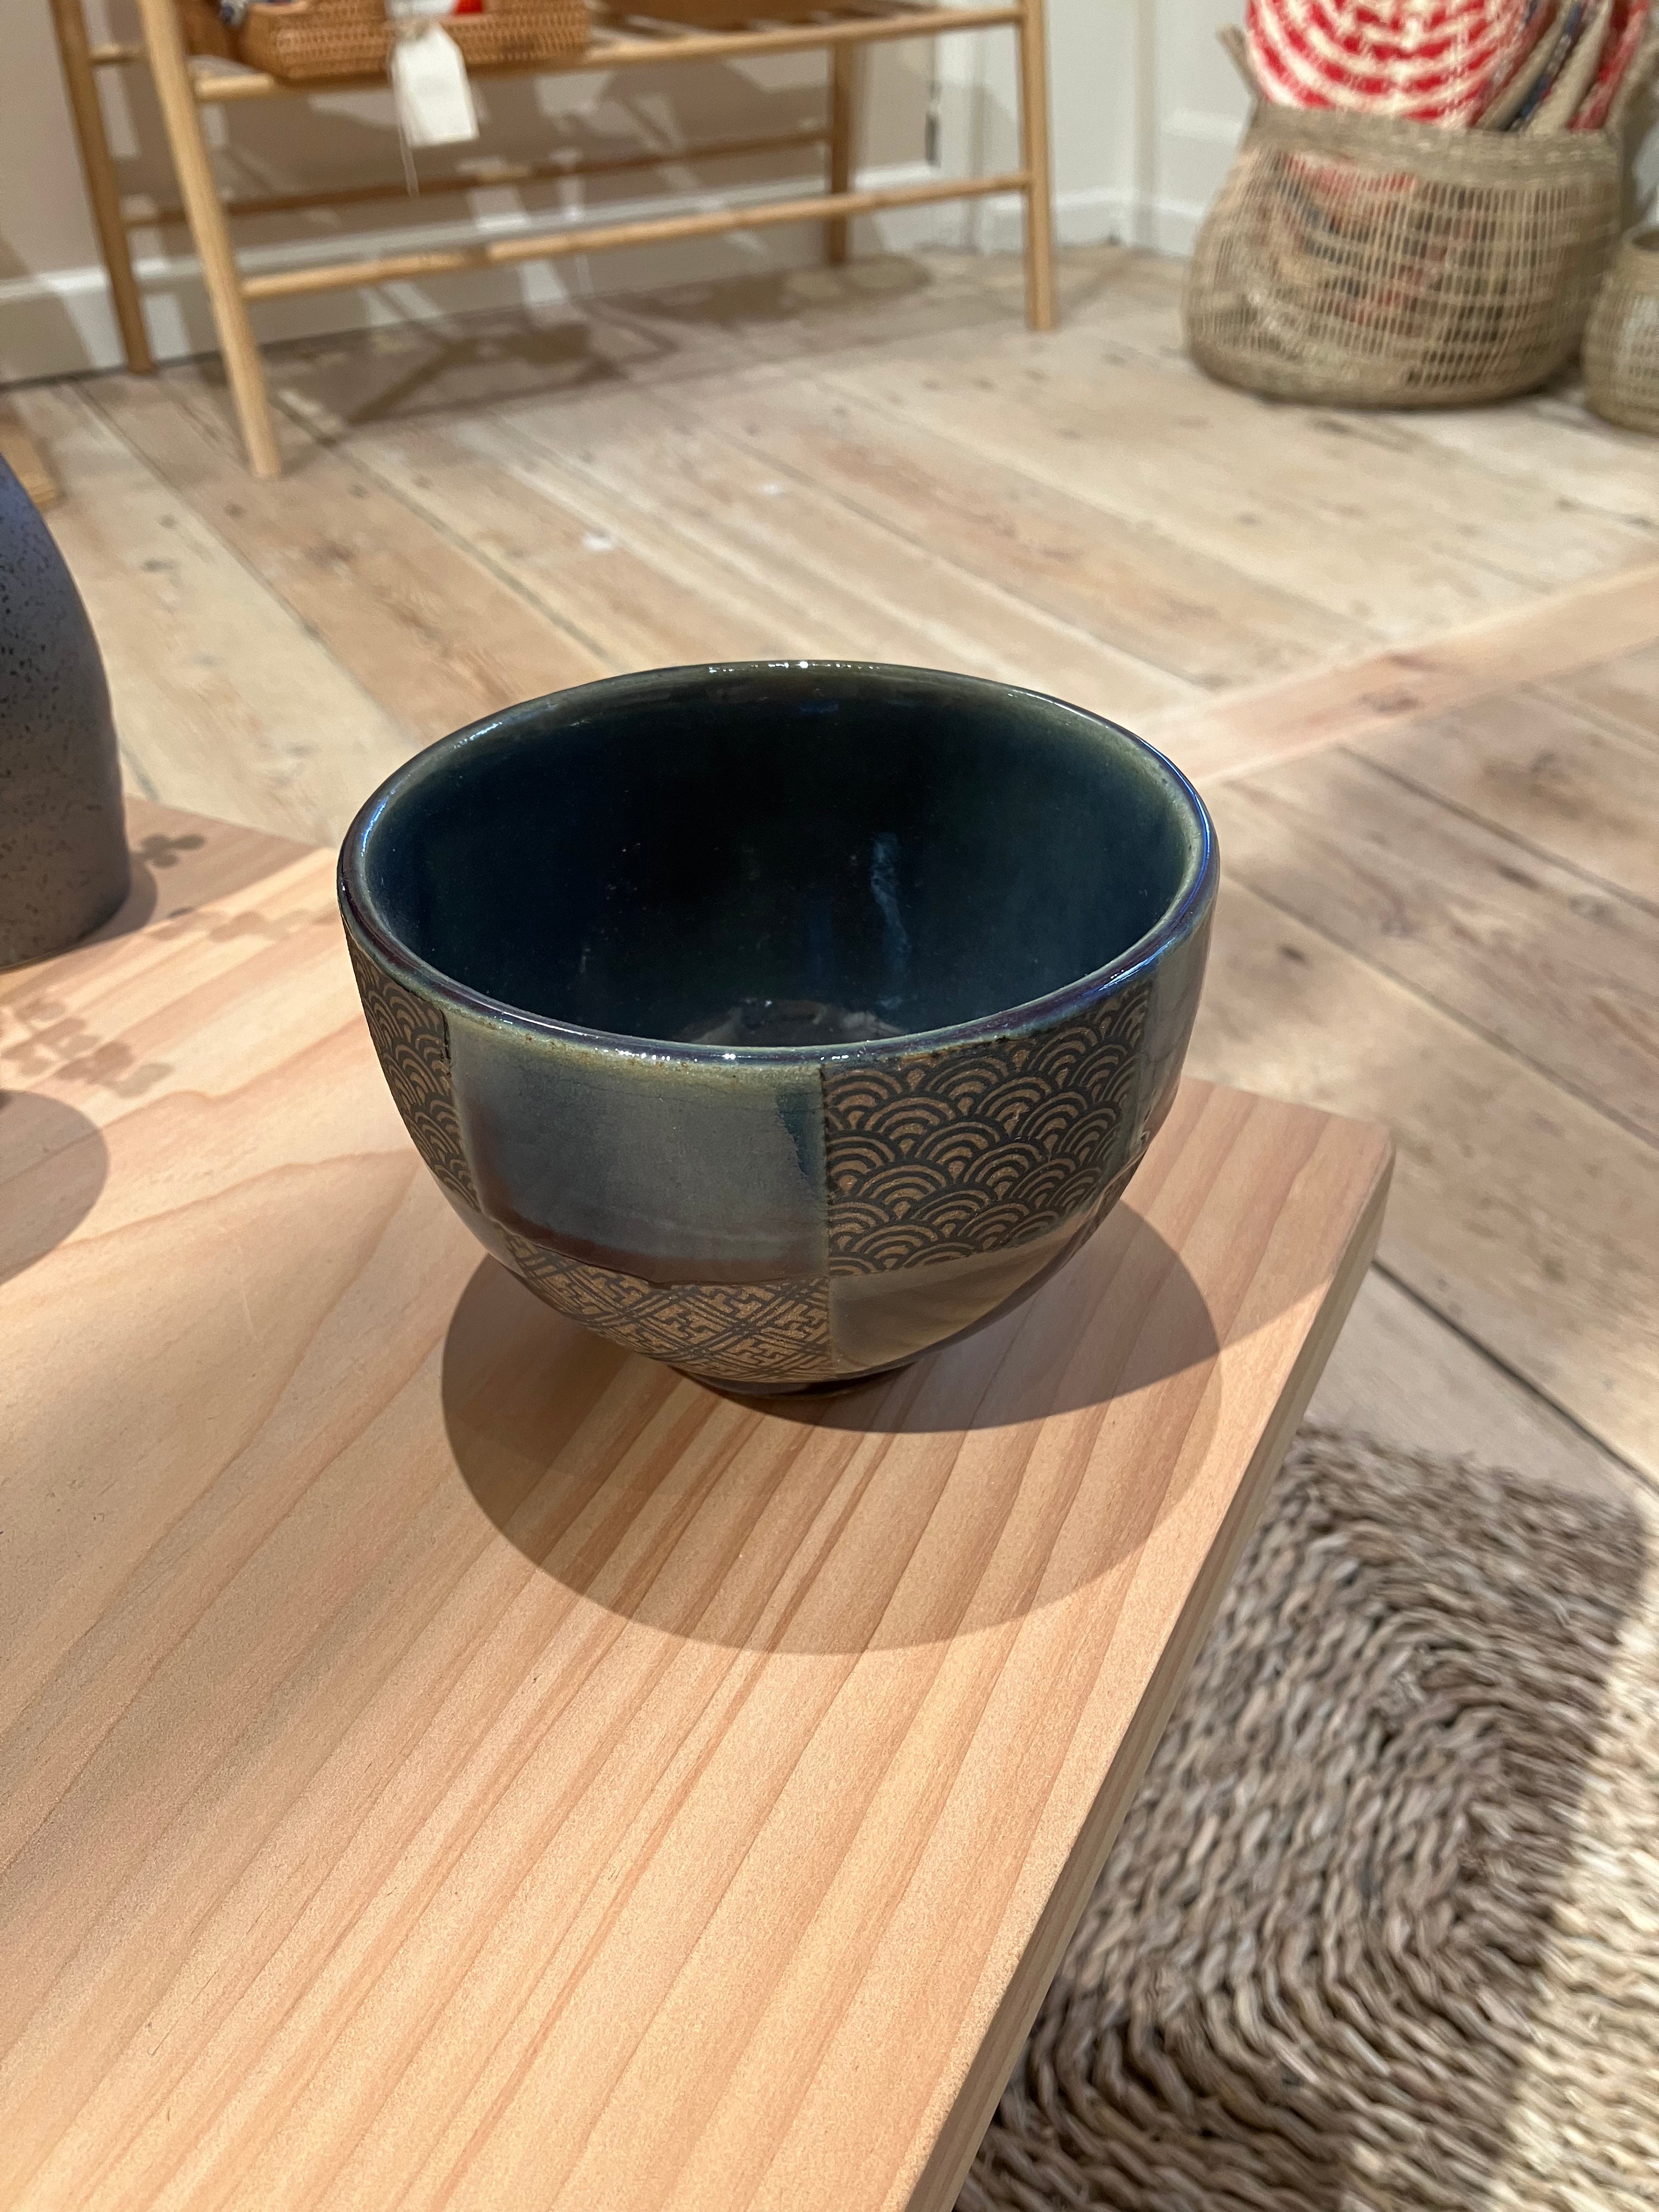 Ceramic bowl with blue checks and Japanese patterns